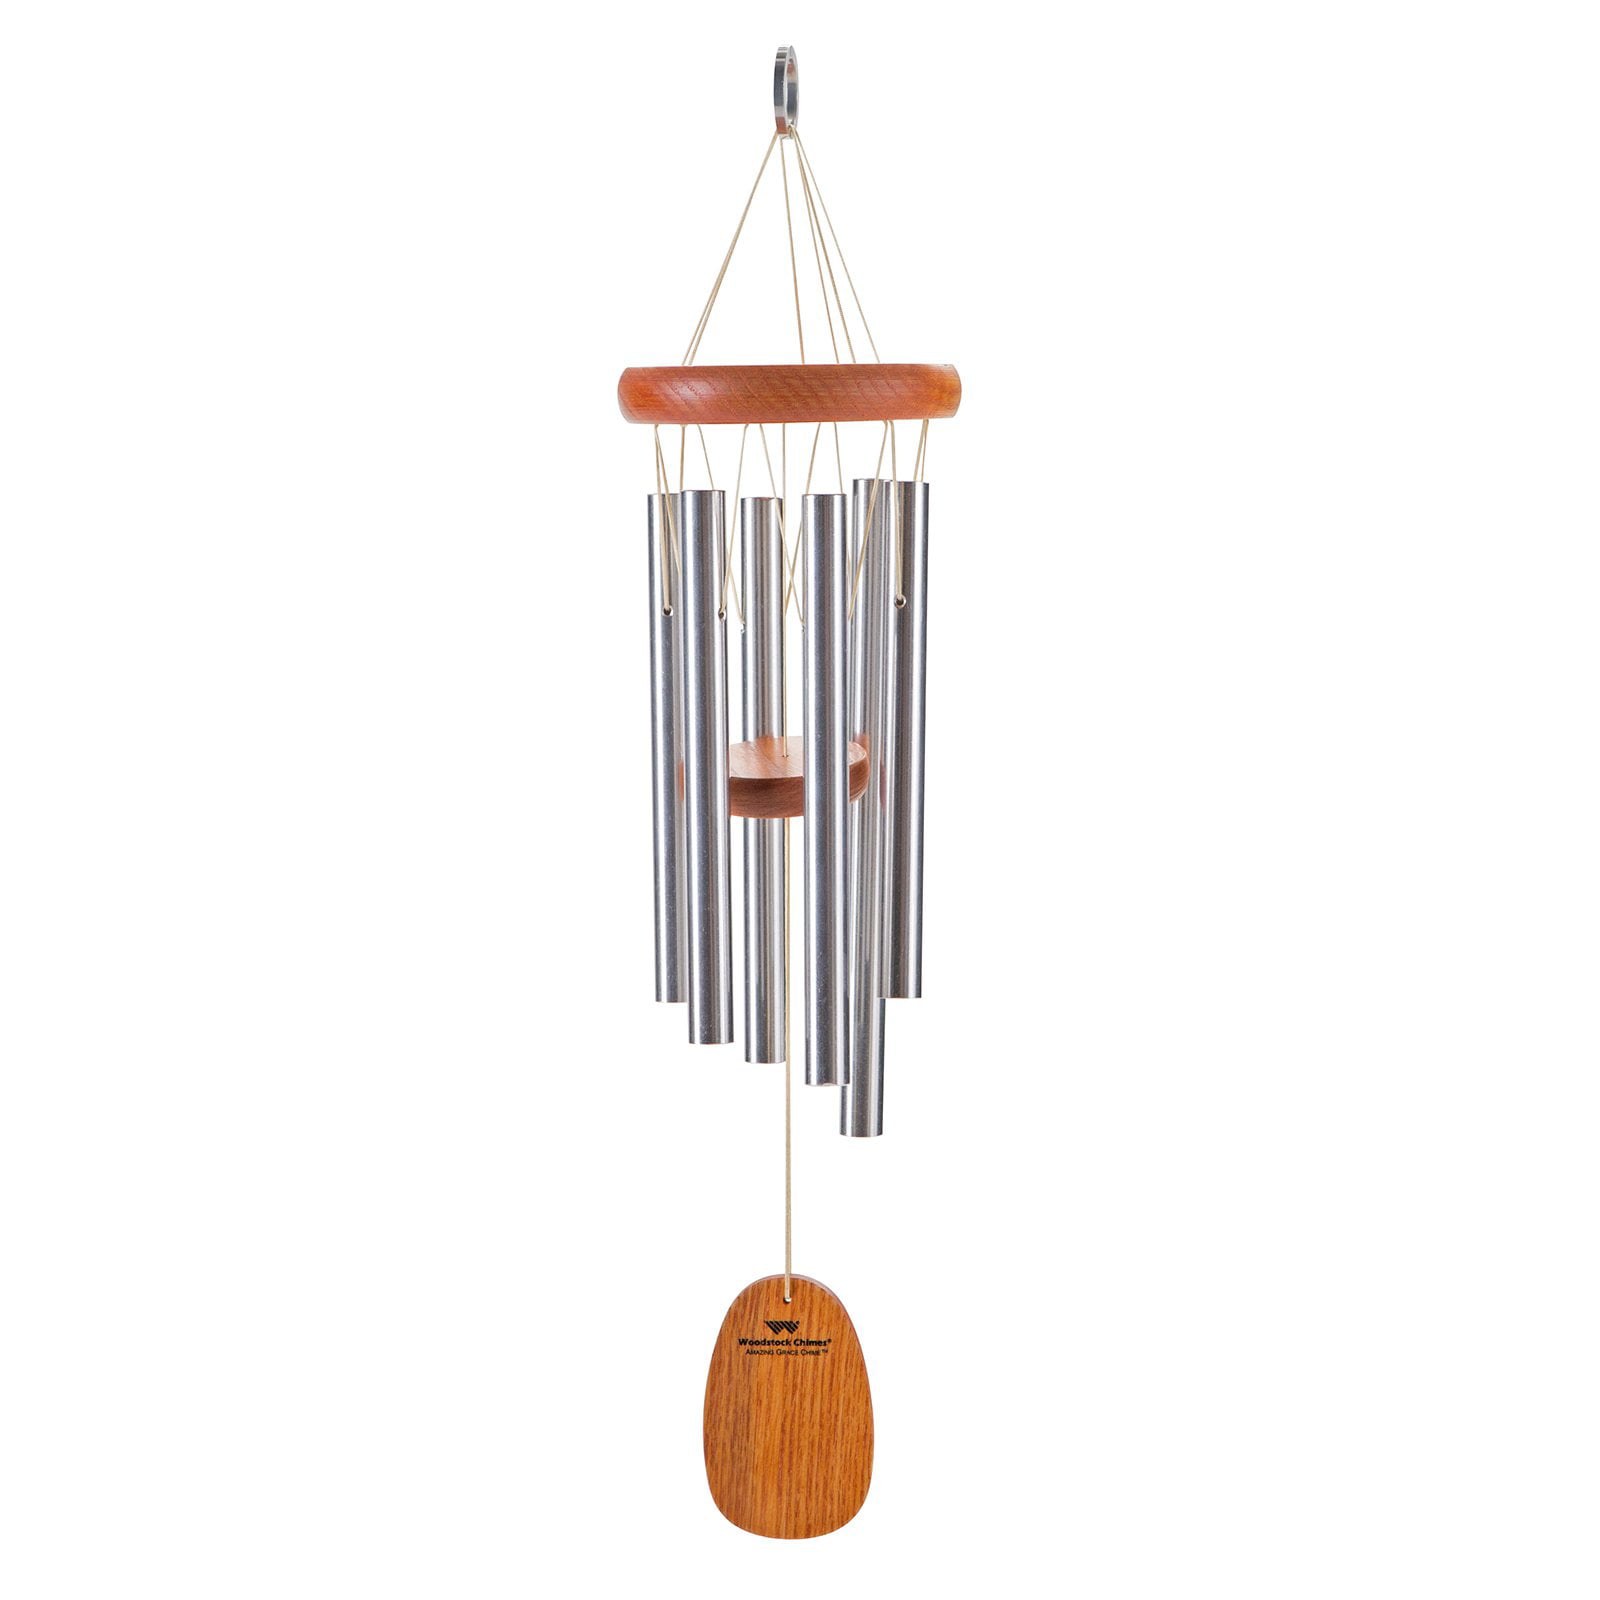 Durable and Hand Tuned Bronze Amazing Grace Wind Chime Inspirational Music Collection for Outdoor Patio Gift ABBLE 29“ Classic Aluminum Wind Chimes 5 Aluminum Alloy Tube and Wood Design 